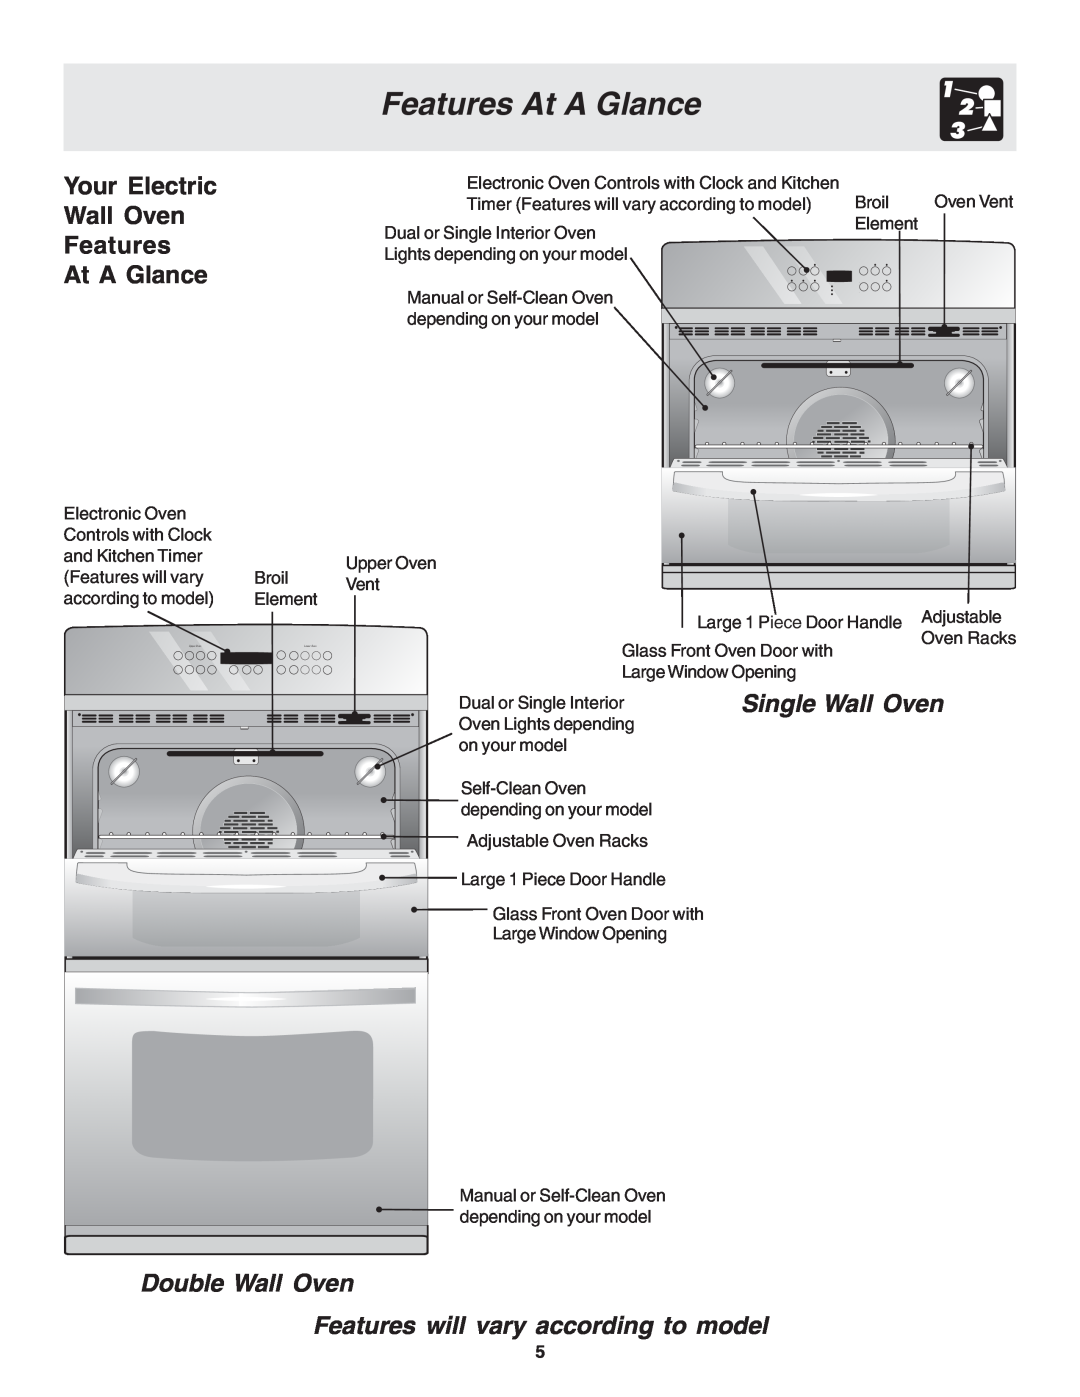 Frigidaire 318205115E warranty Your Electric Wall Oven Features At A Glance, Single Wall Oven 